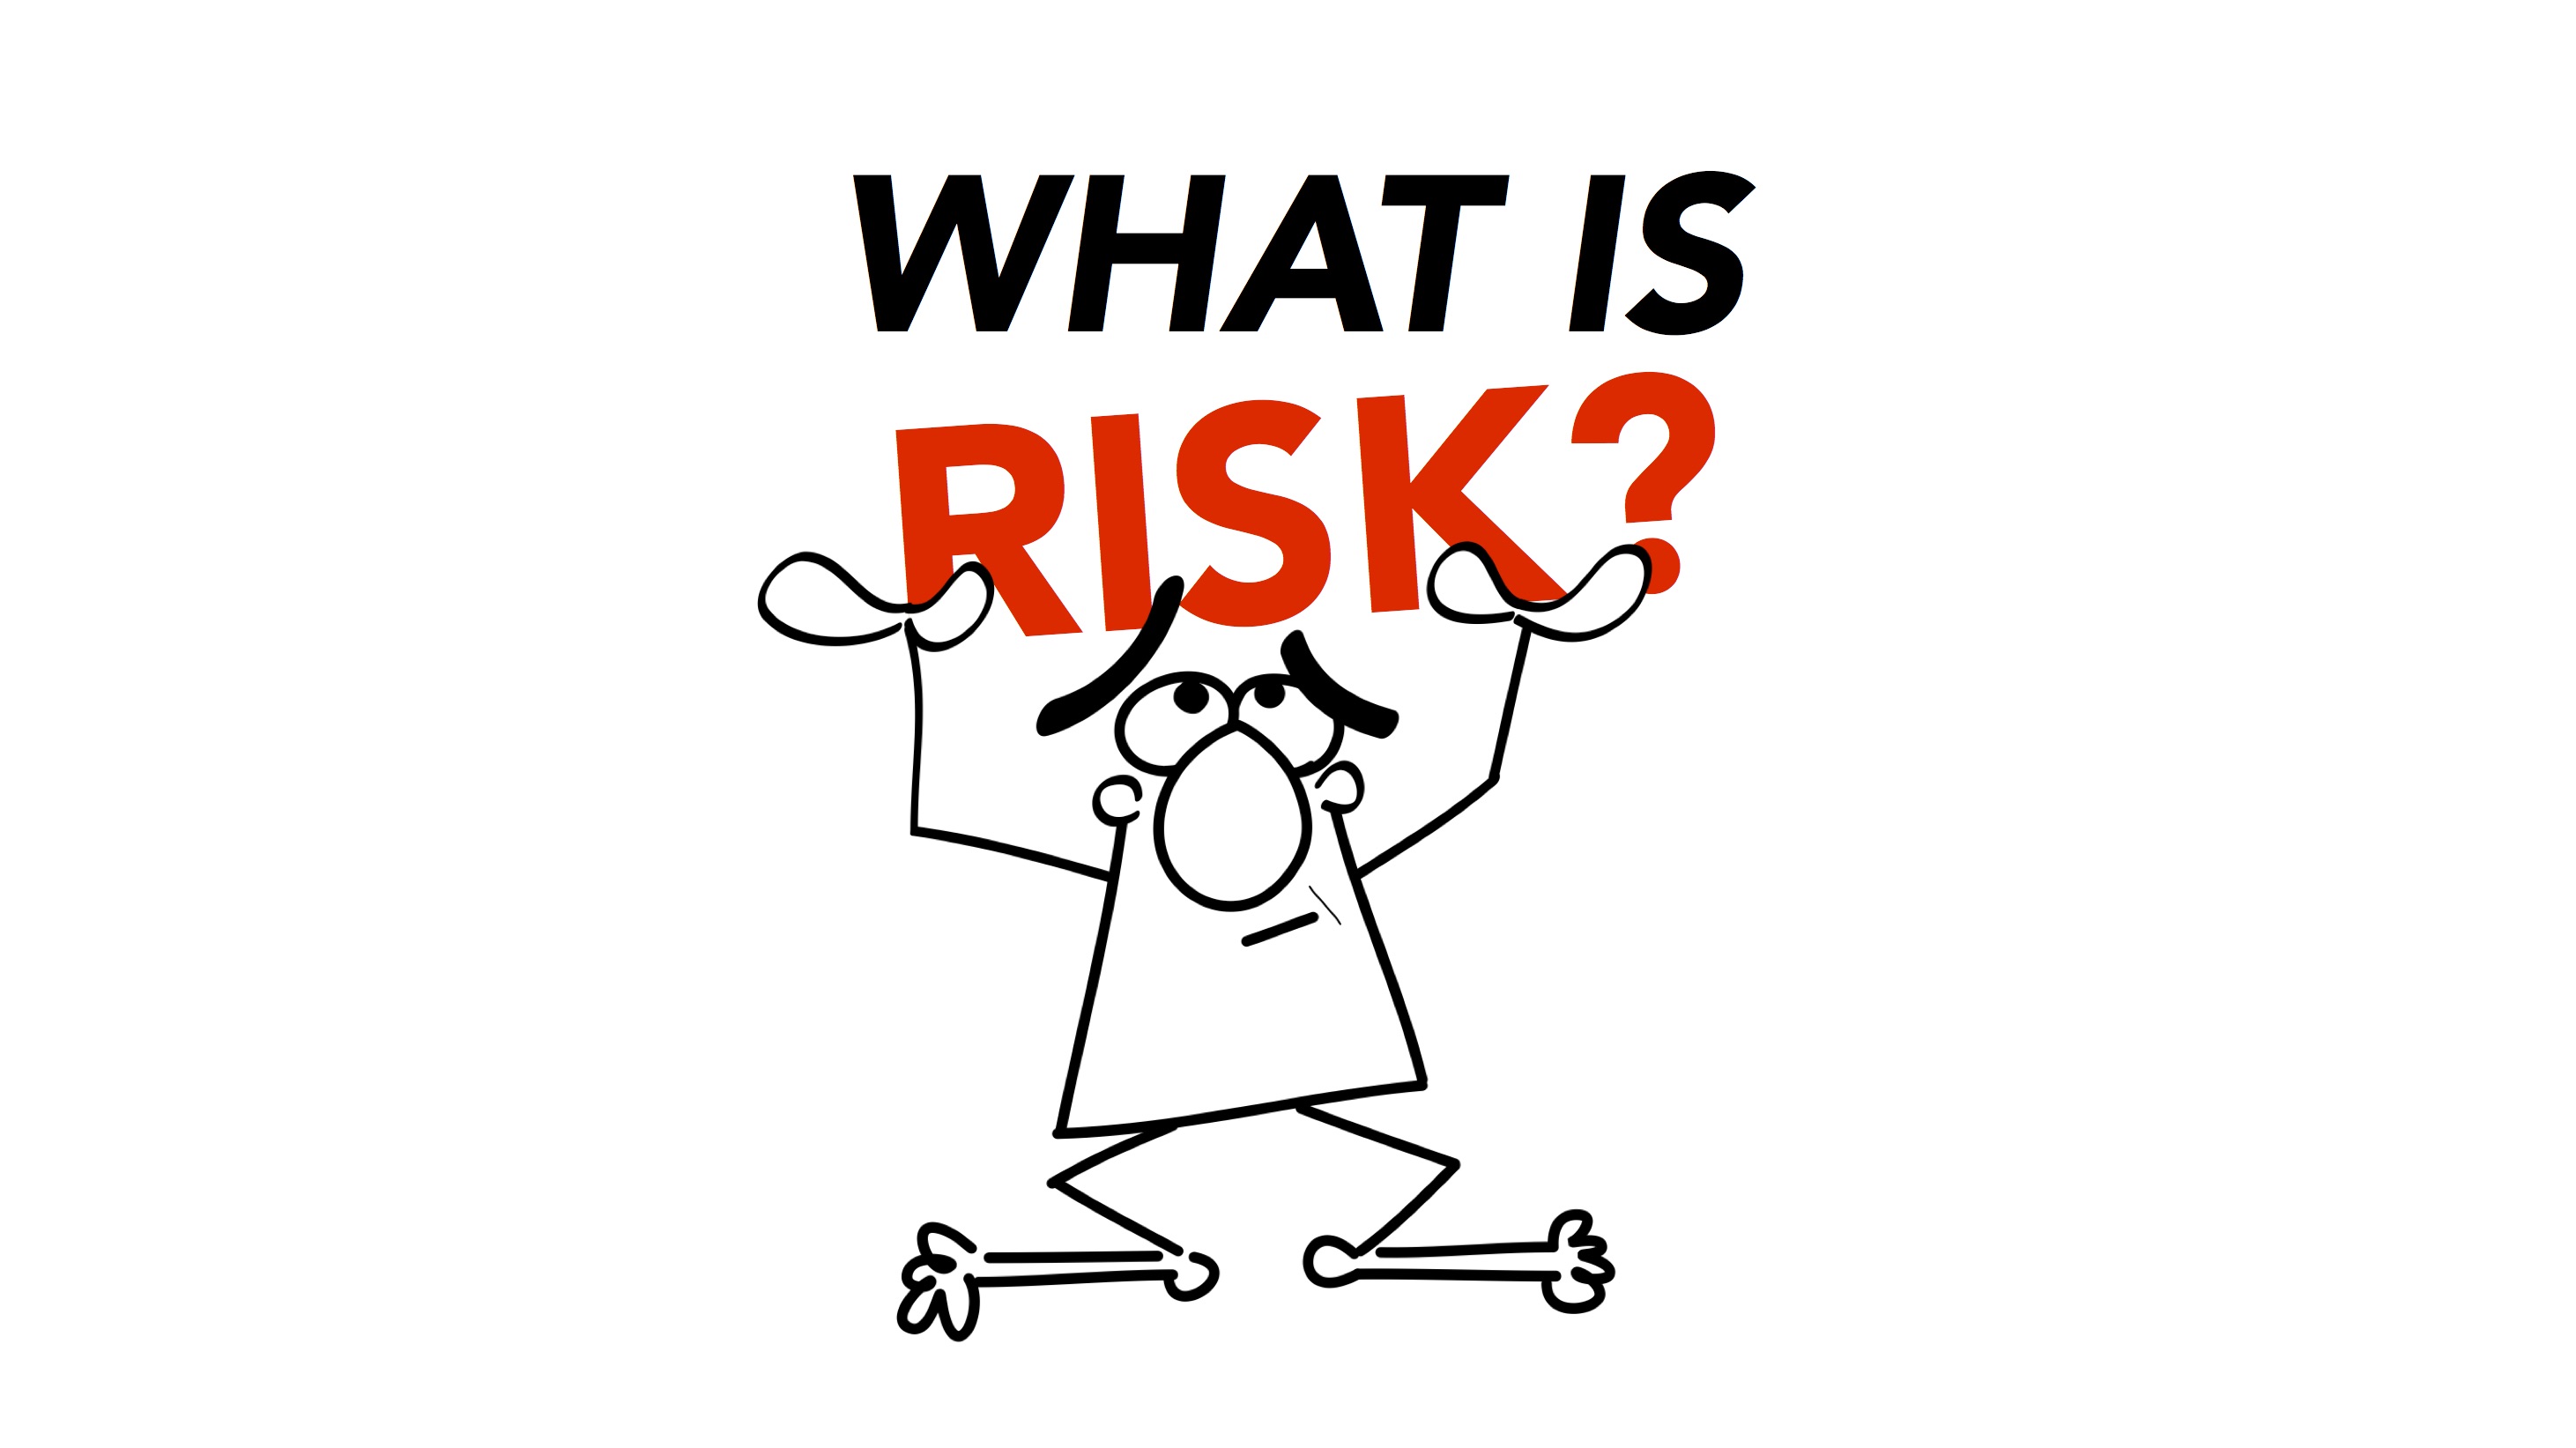 A video on risk